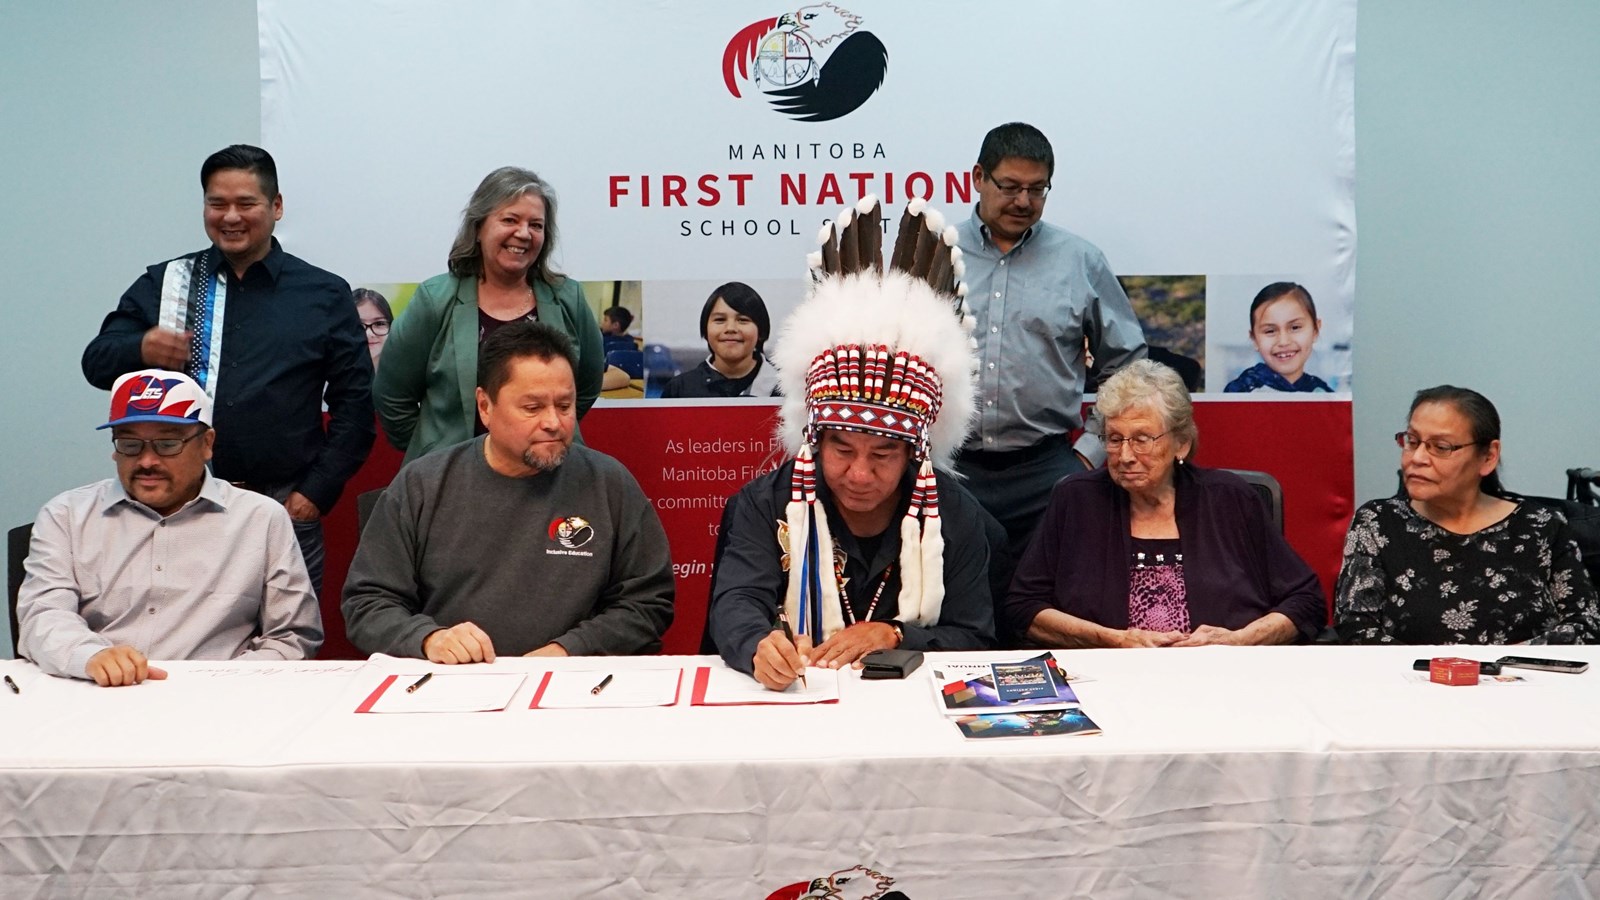 Kinonjeoshtegon First Nation now part of the Manitoba First Nations School System